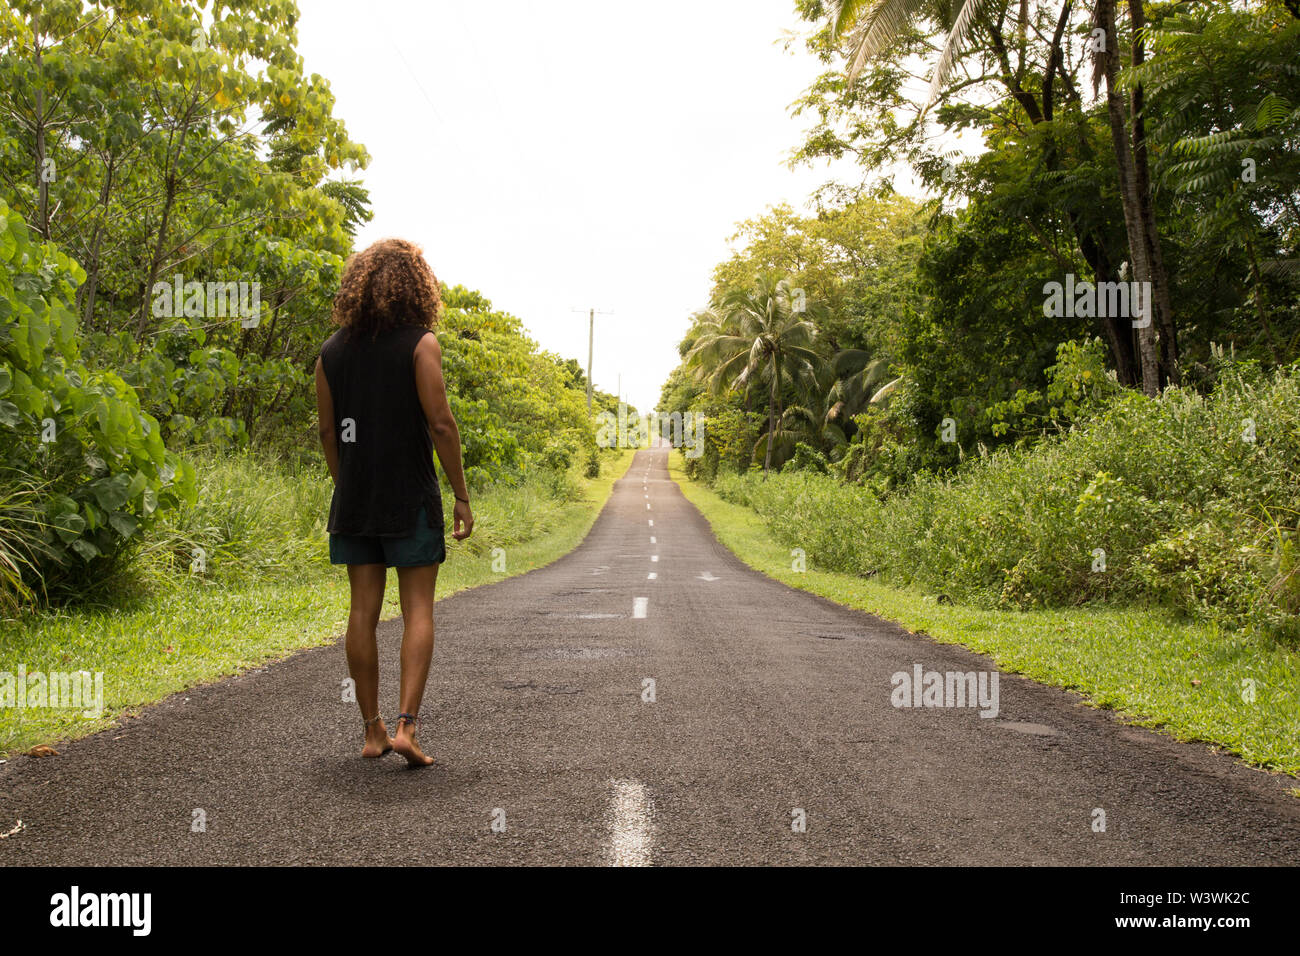 Man, with curly hair, wearing black singlet, walking on empty road Stock Photo